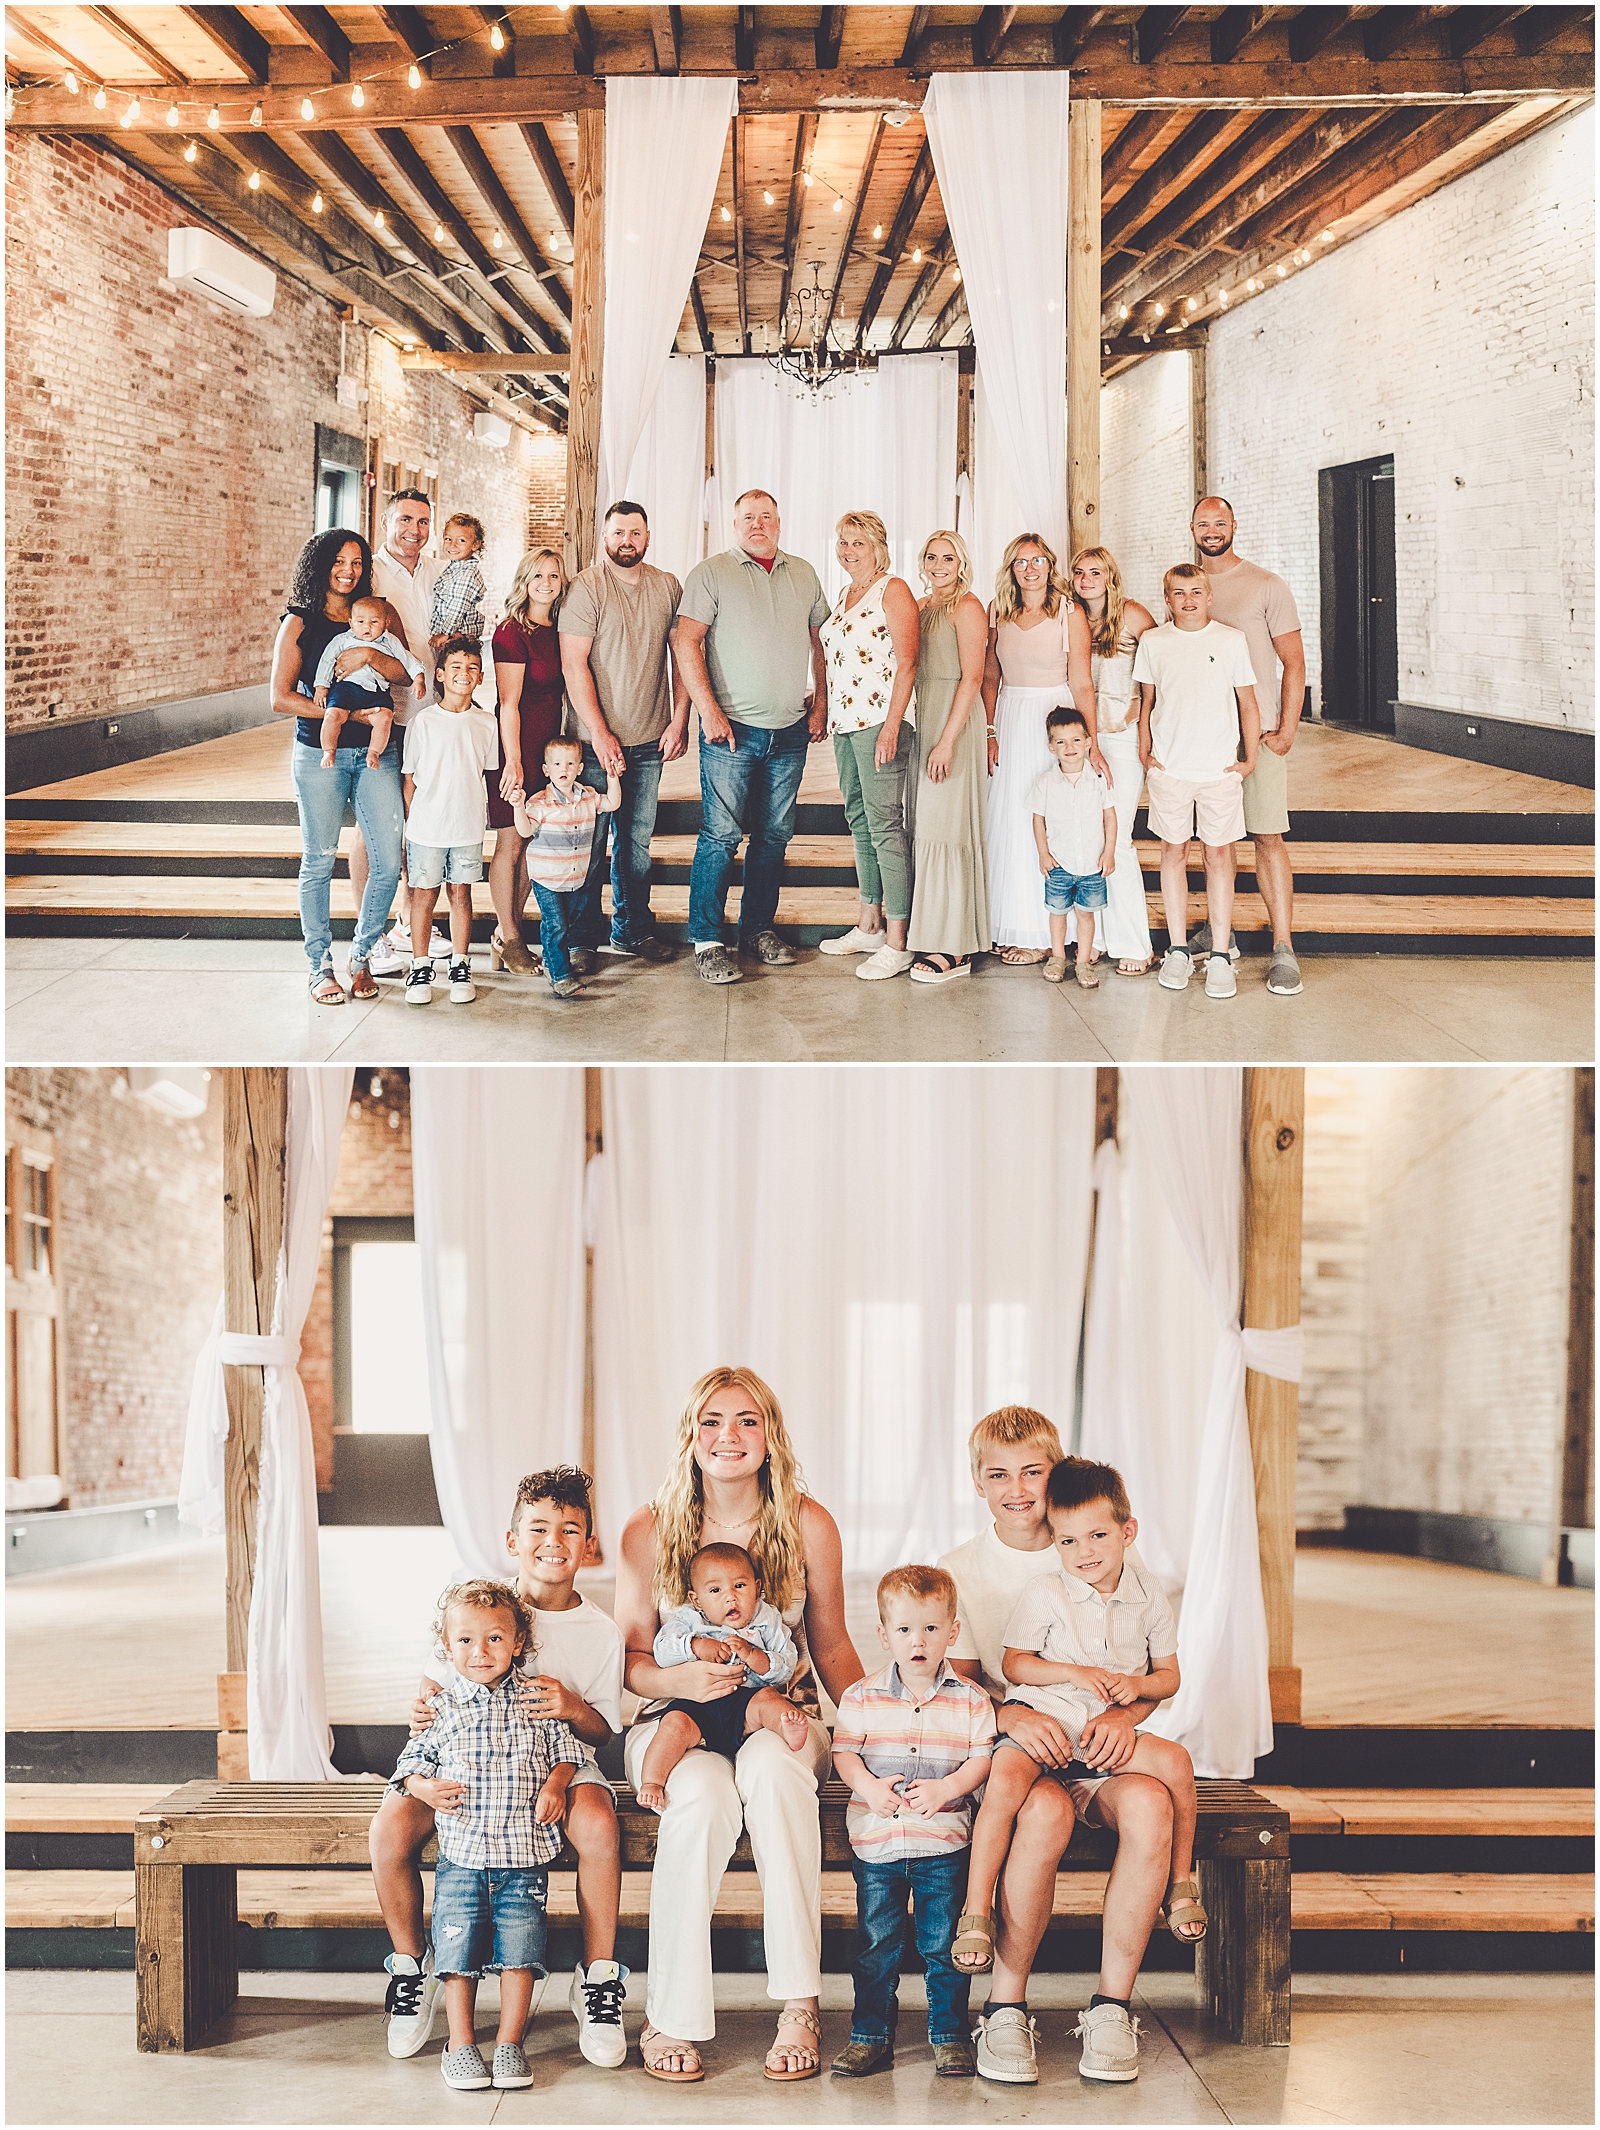 Iroquois County family photos at Town & Country Events in Milford with Kankakee & Iroquois County family photographer Kara Evans Photographer.